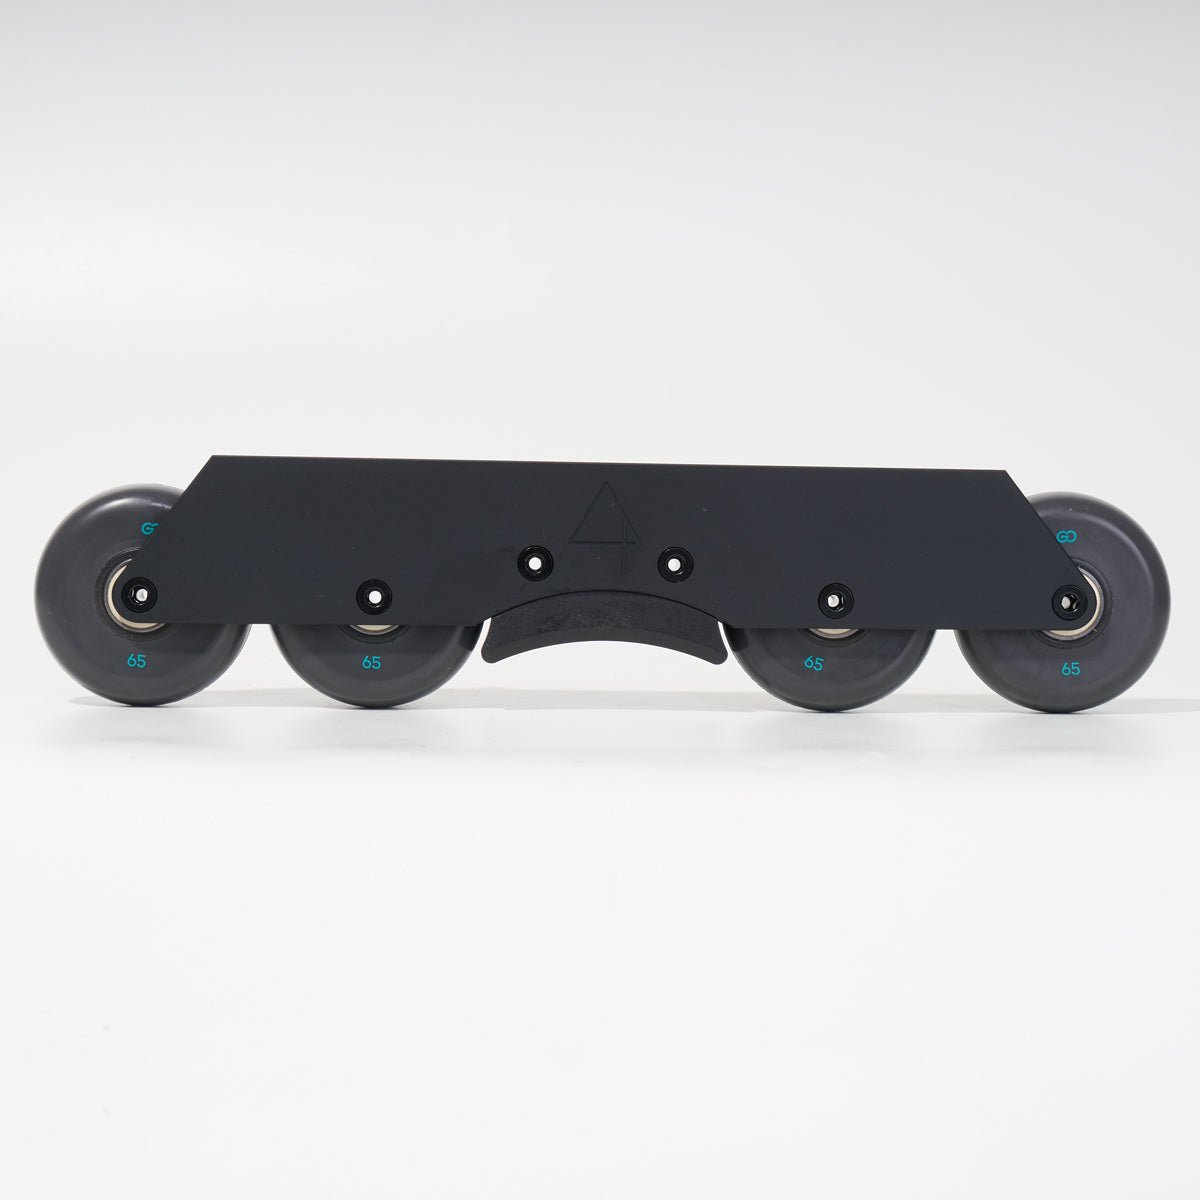 FLAT x Go Project 65mm Complete Frames - Black